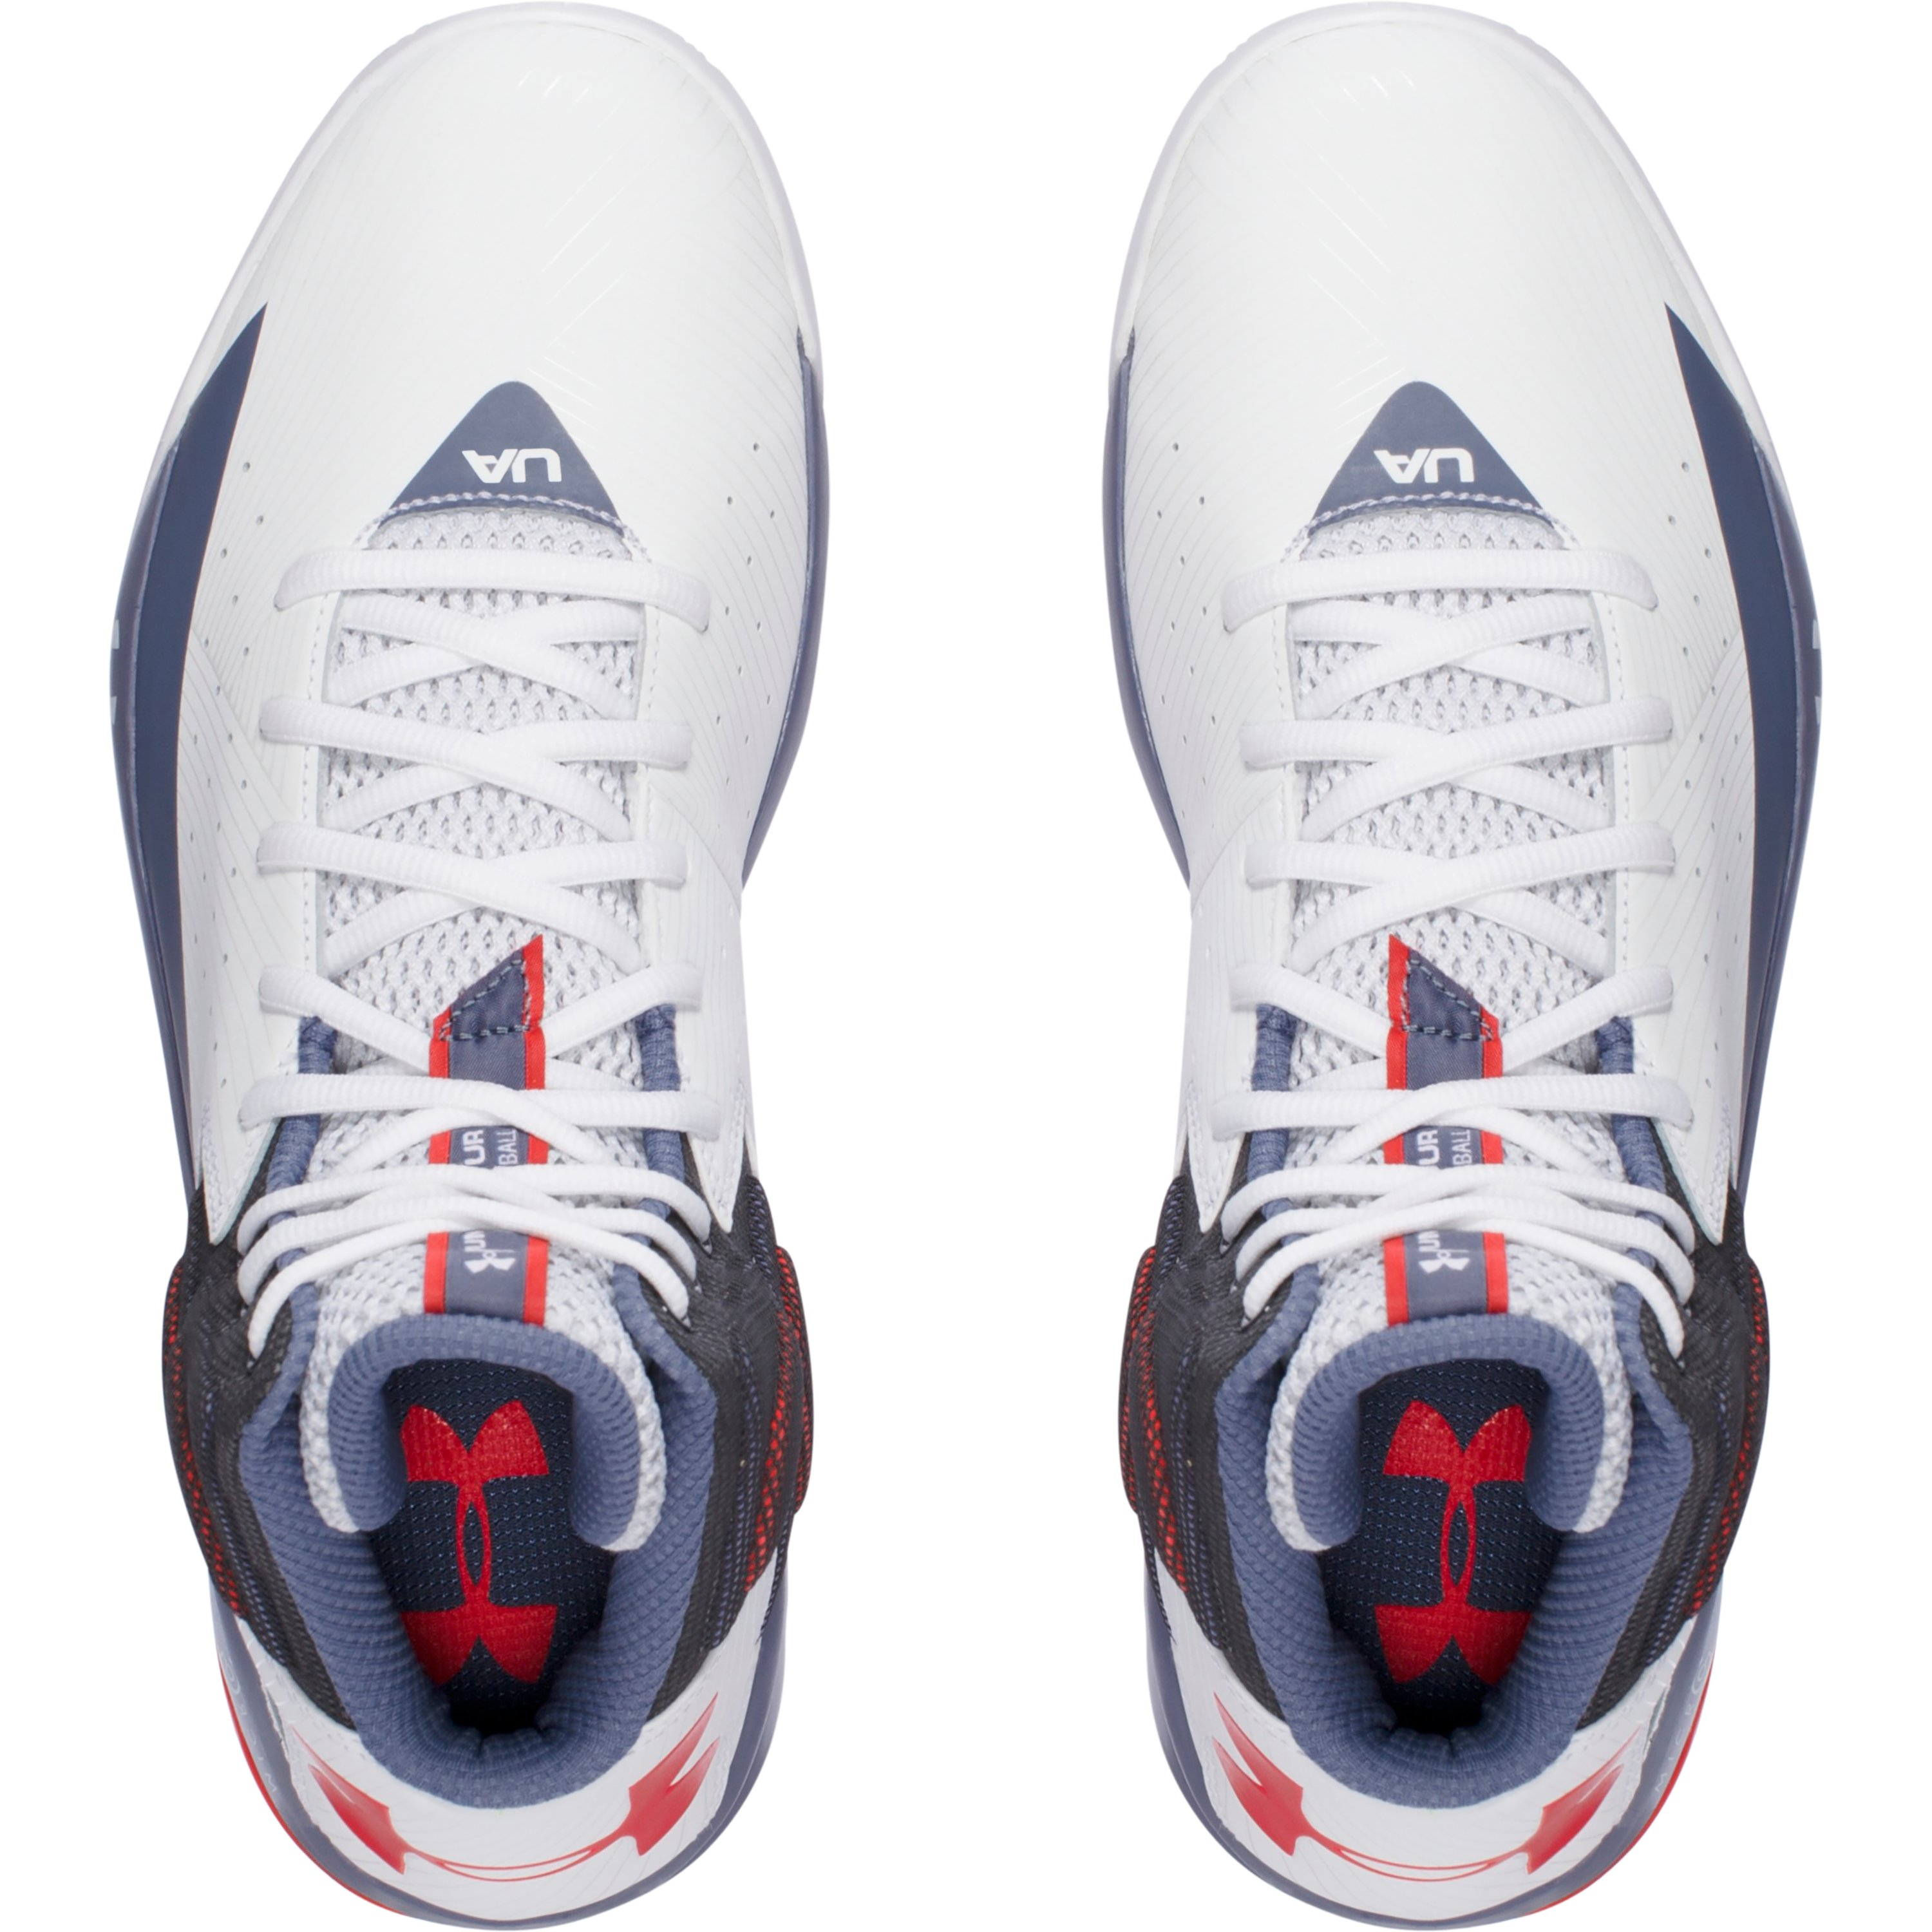 Lyst Under armour Men's Ua Rocket Basketball Shoes in